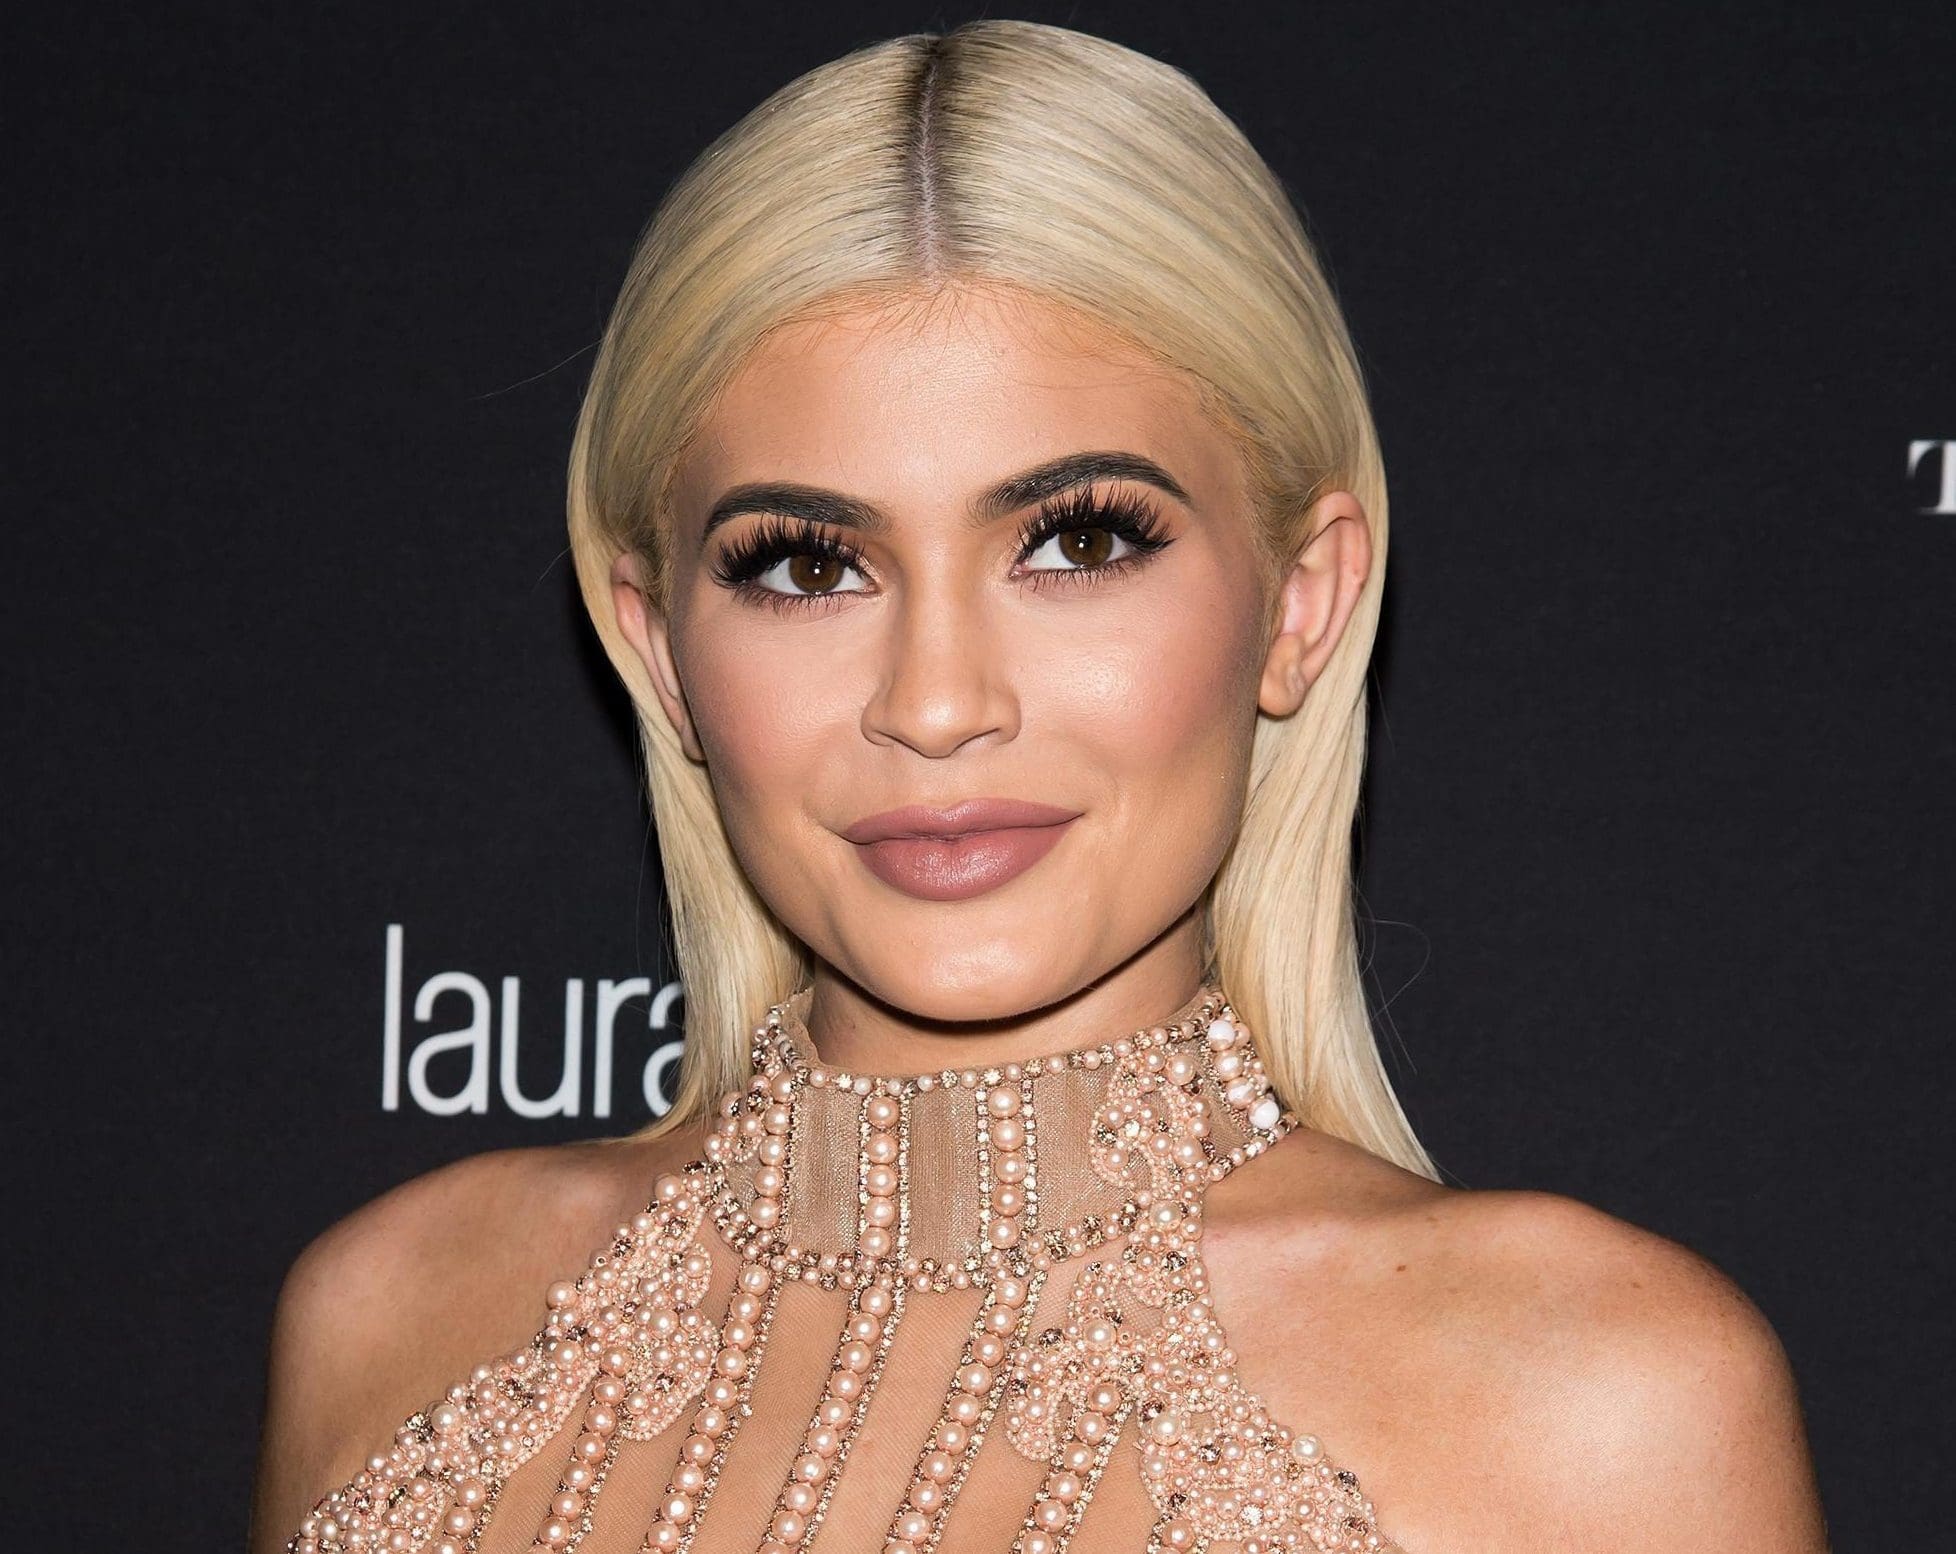 Kylie Jenner Sold The Majority Ownership Of Her Cosmetic Company - People Are Convinced She Is Working On Something New